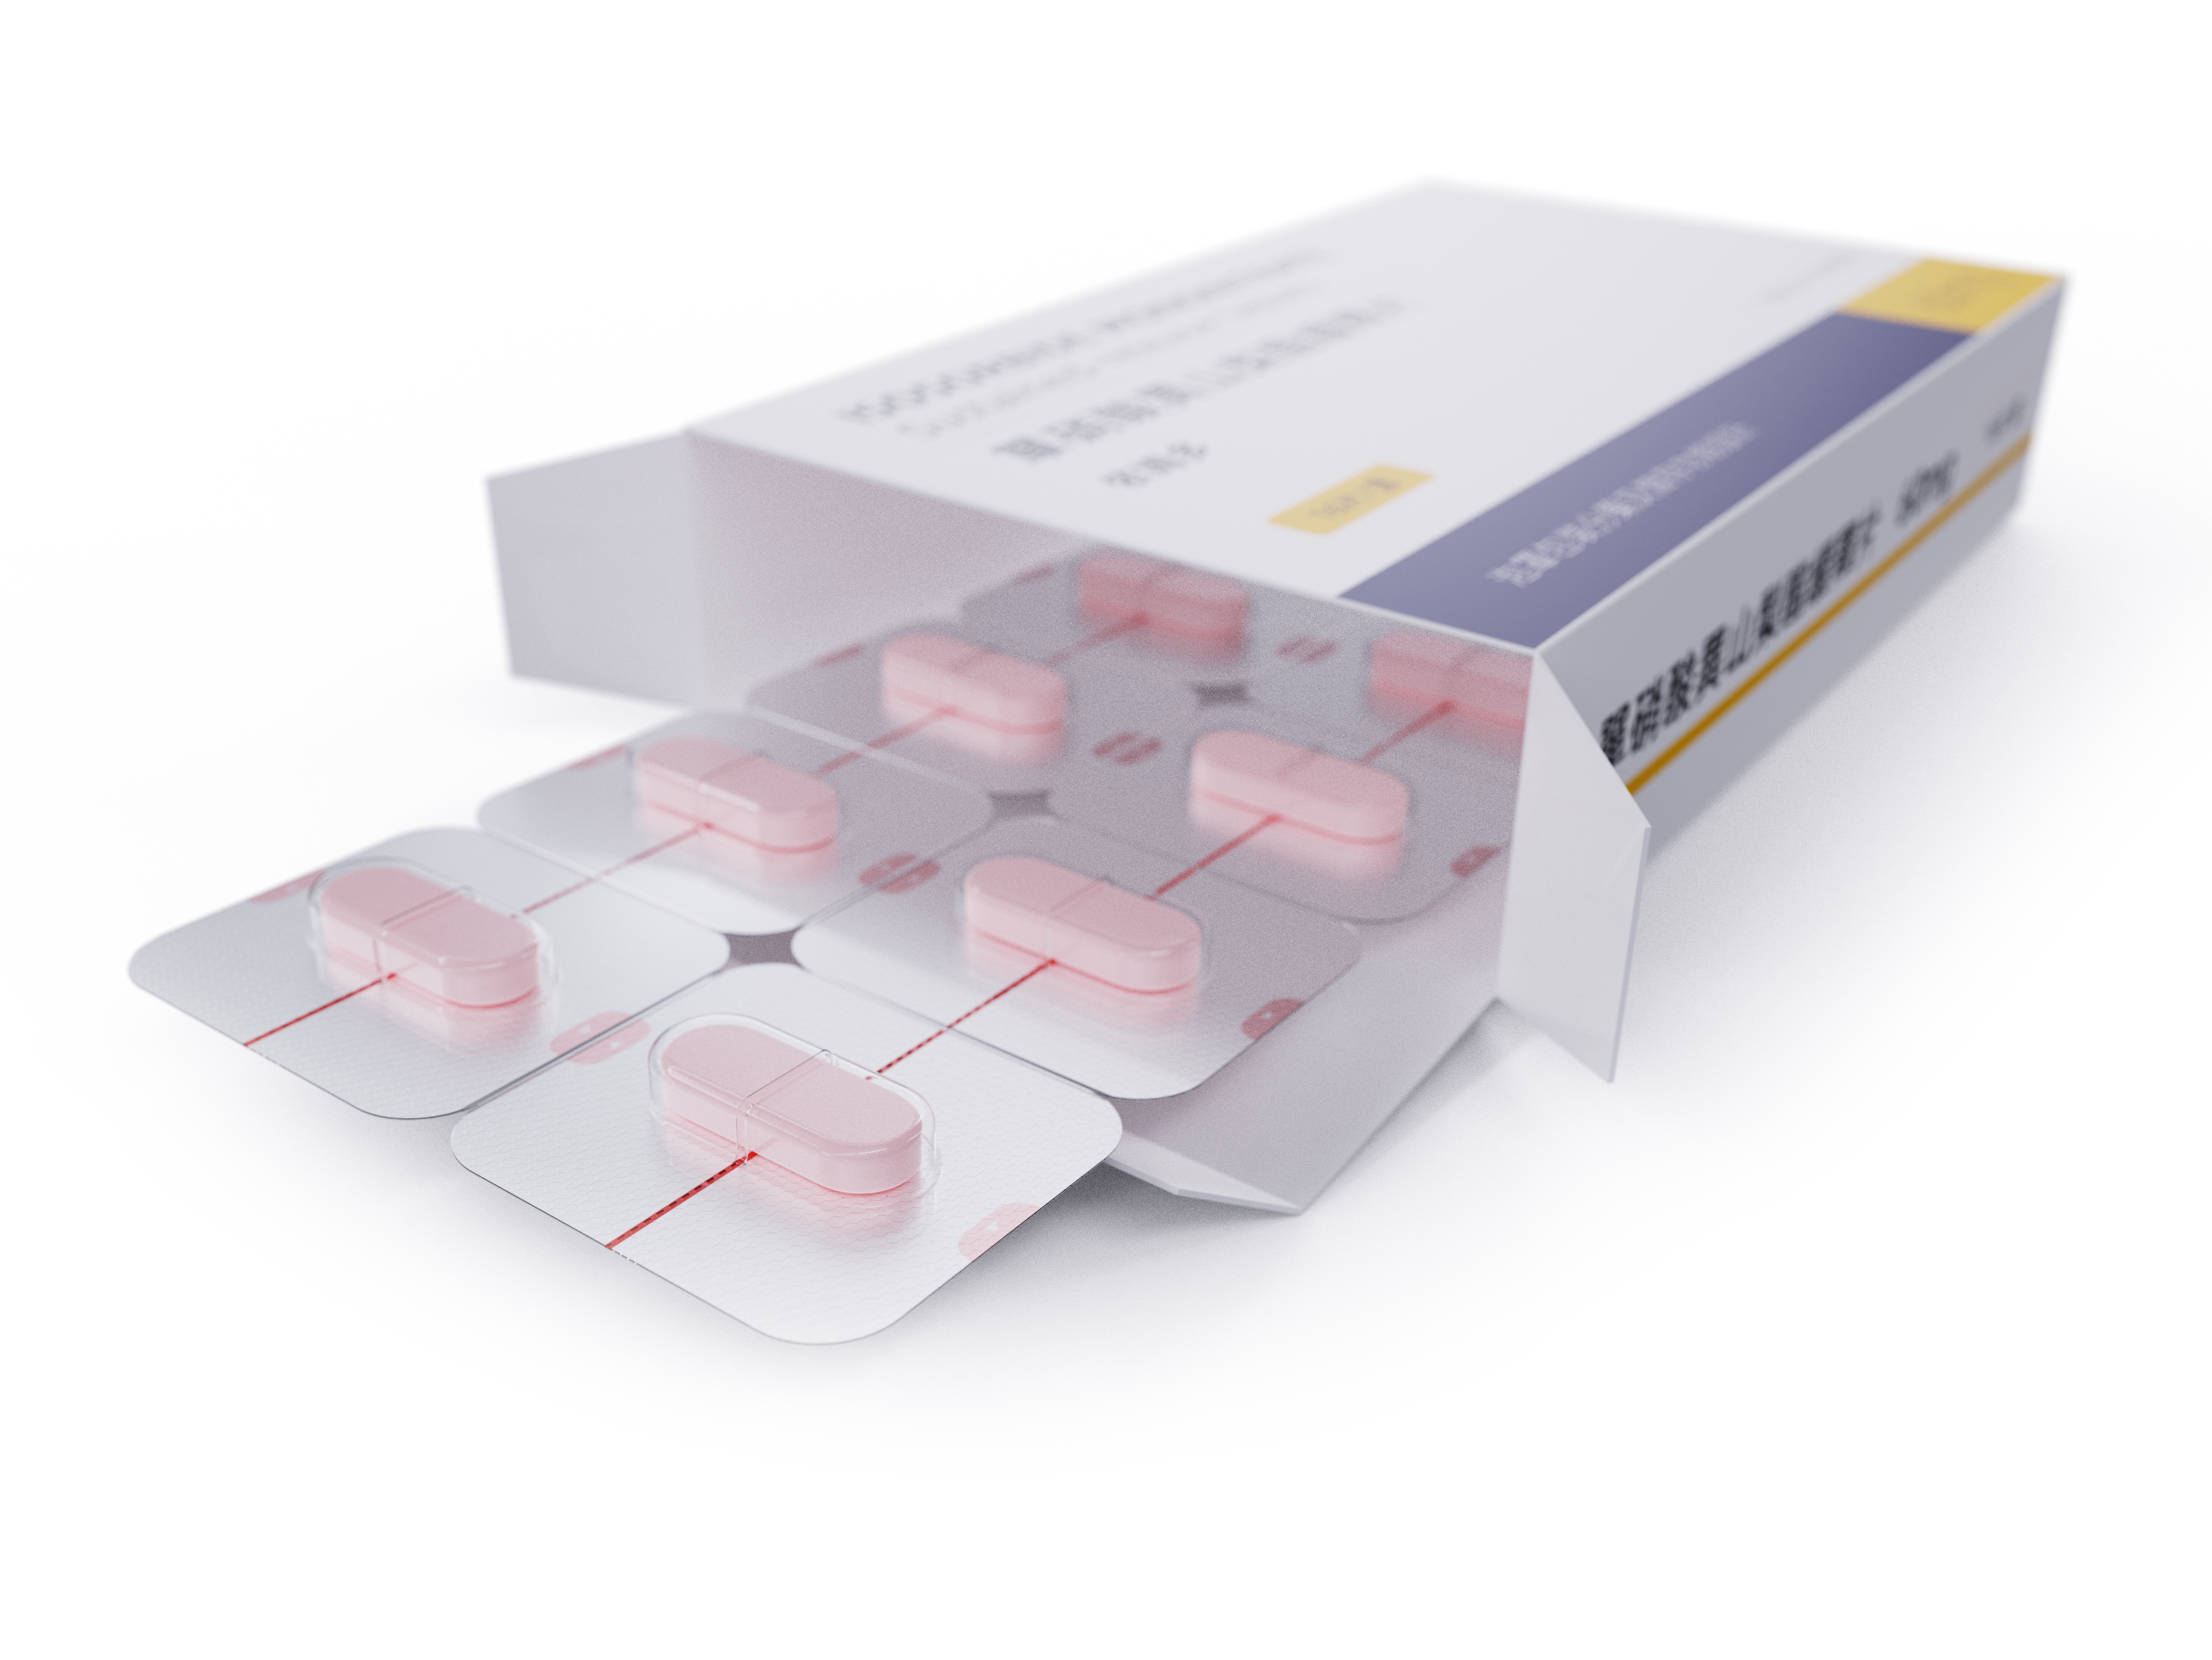 Blister Packaging Design of Pill Splitter and Container